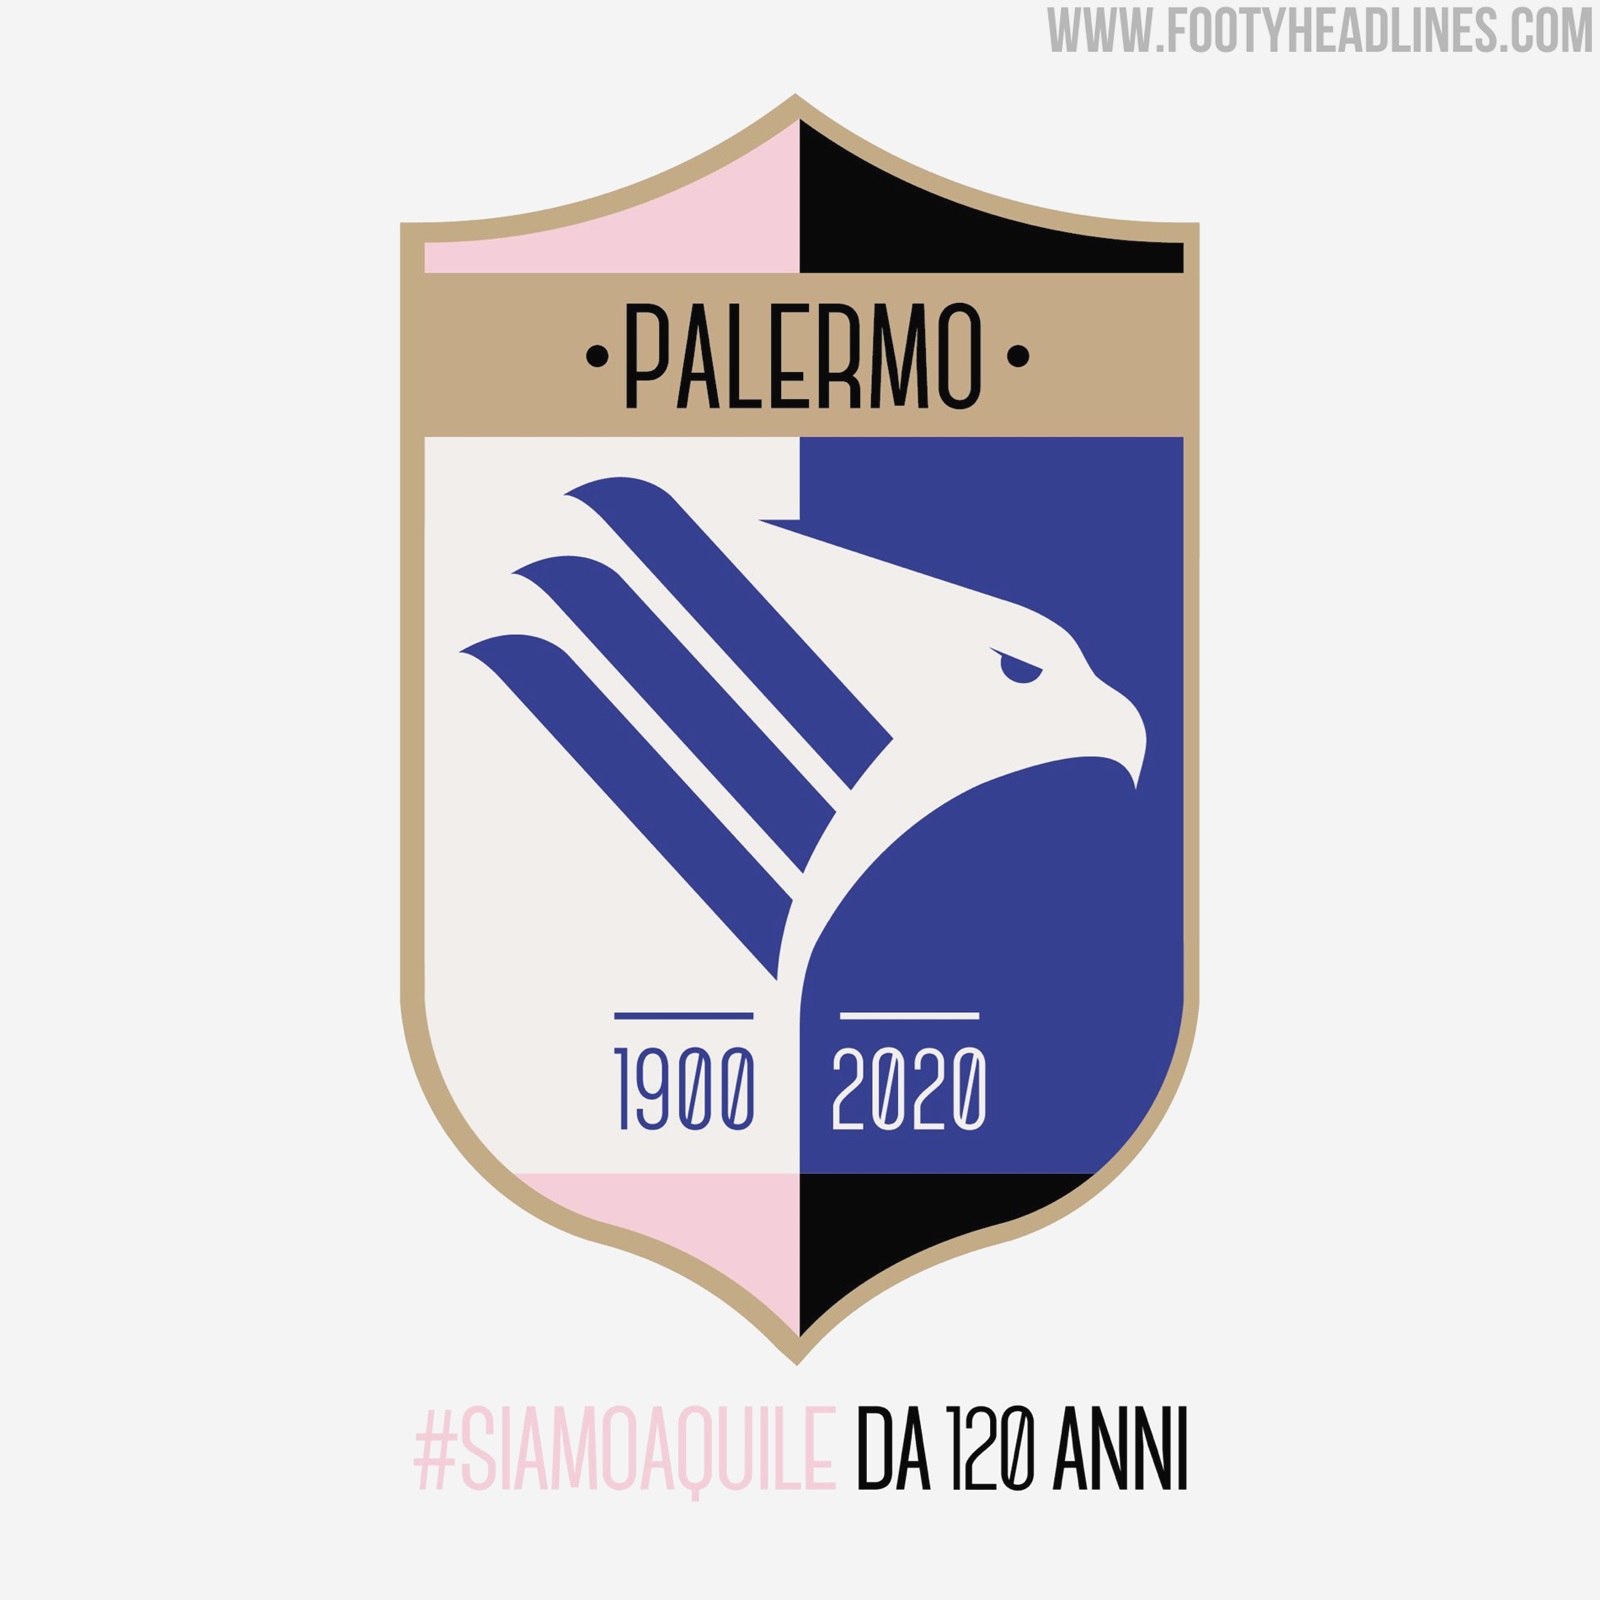 Palermo, Serie A, football, Italy, emblem of Palermo, football